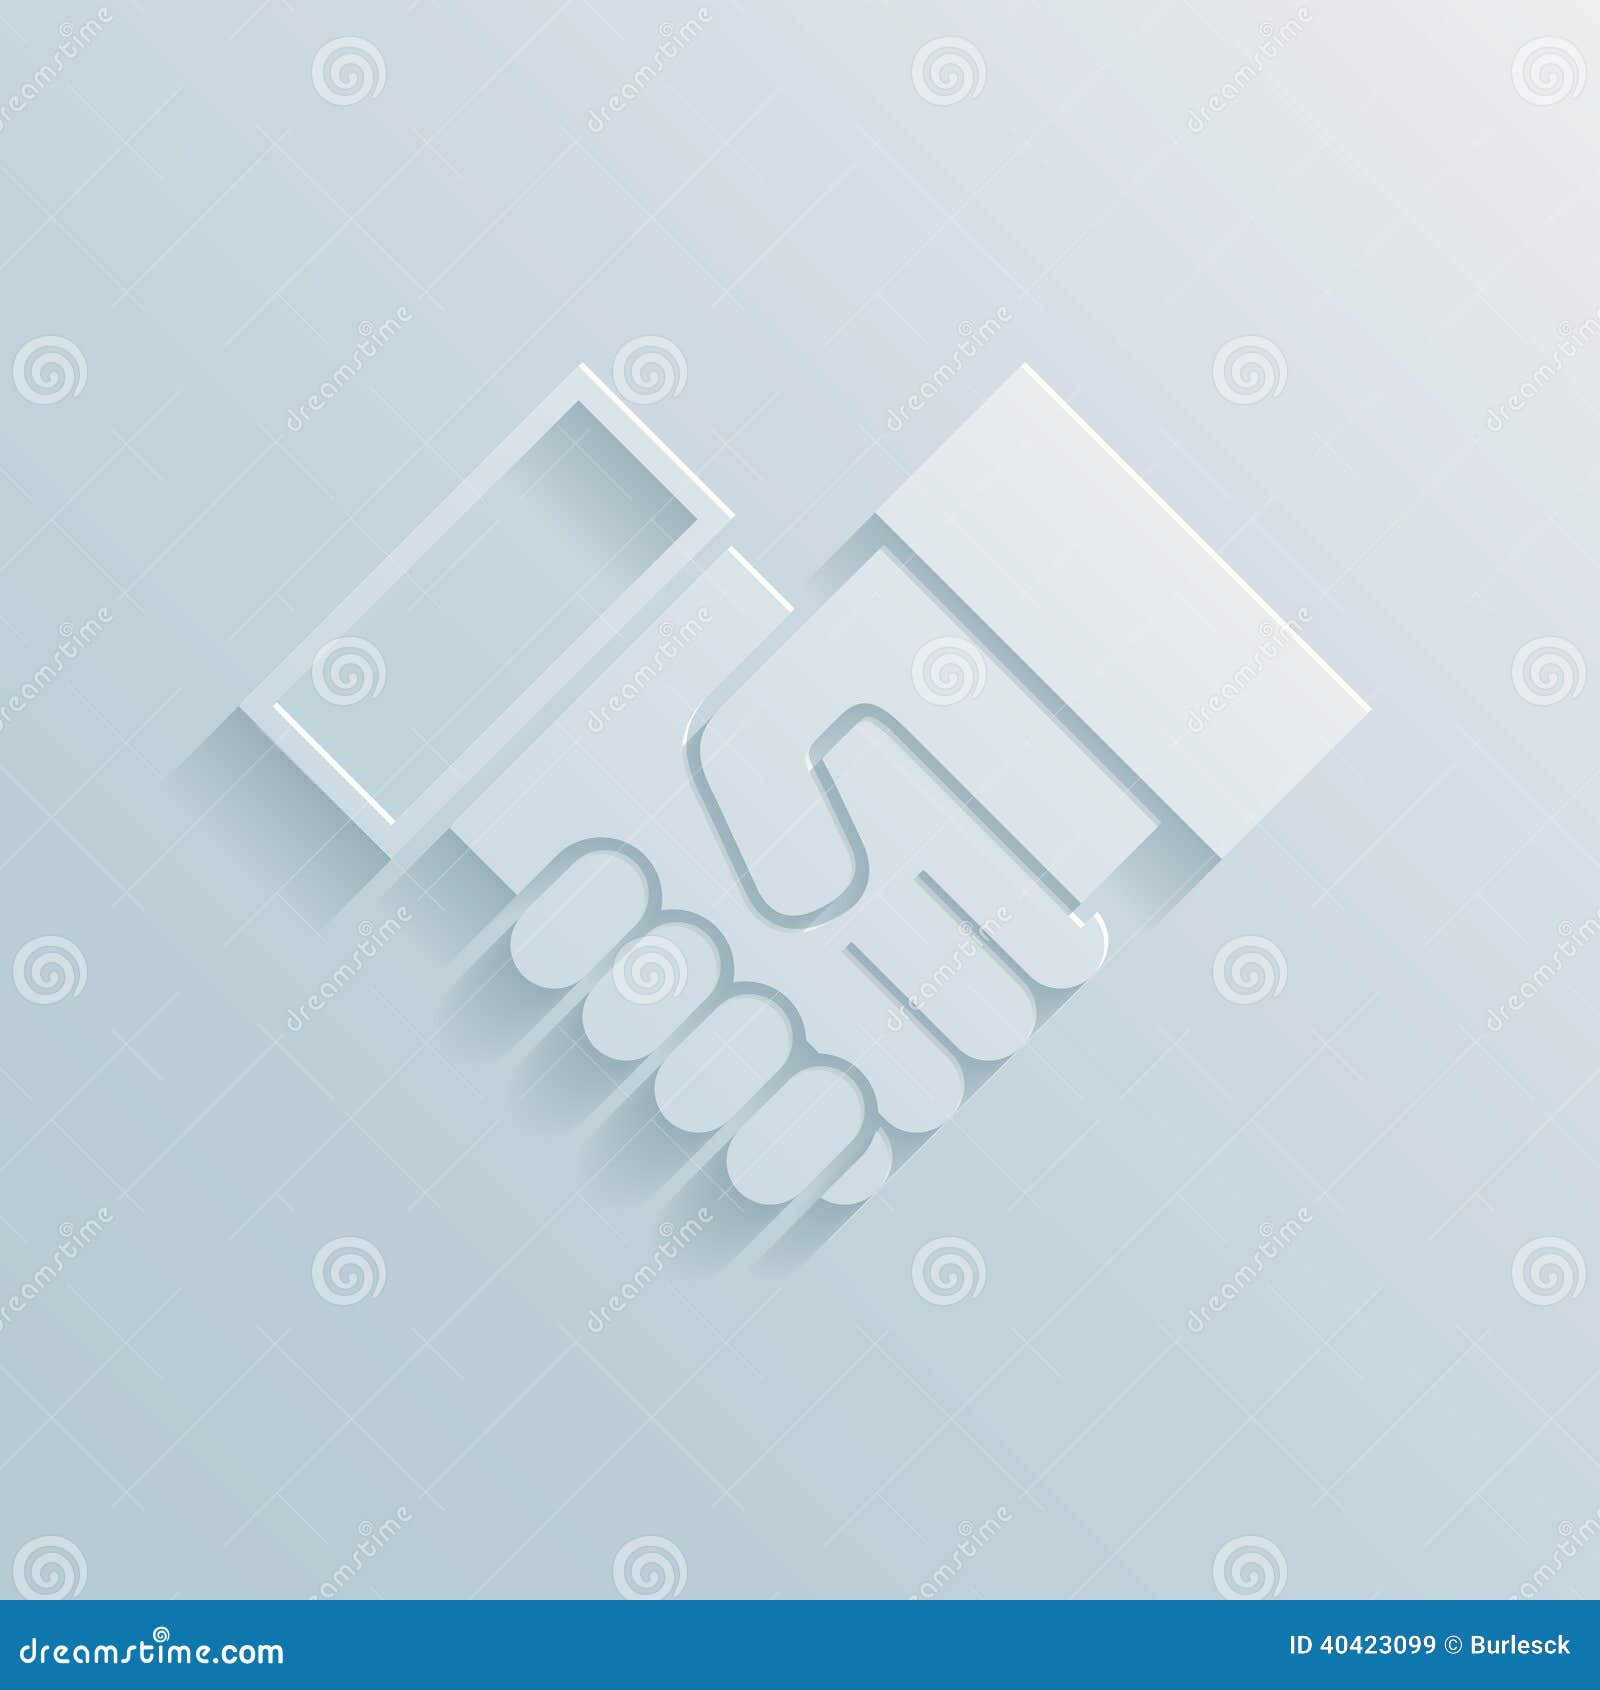 Premium Vector  Handshake isolated on blue background approval gesture  business concept of partnership cooperation successful deal hand shake  symbol vector 3d illustration